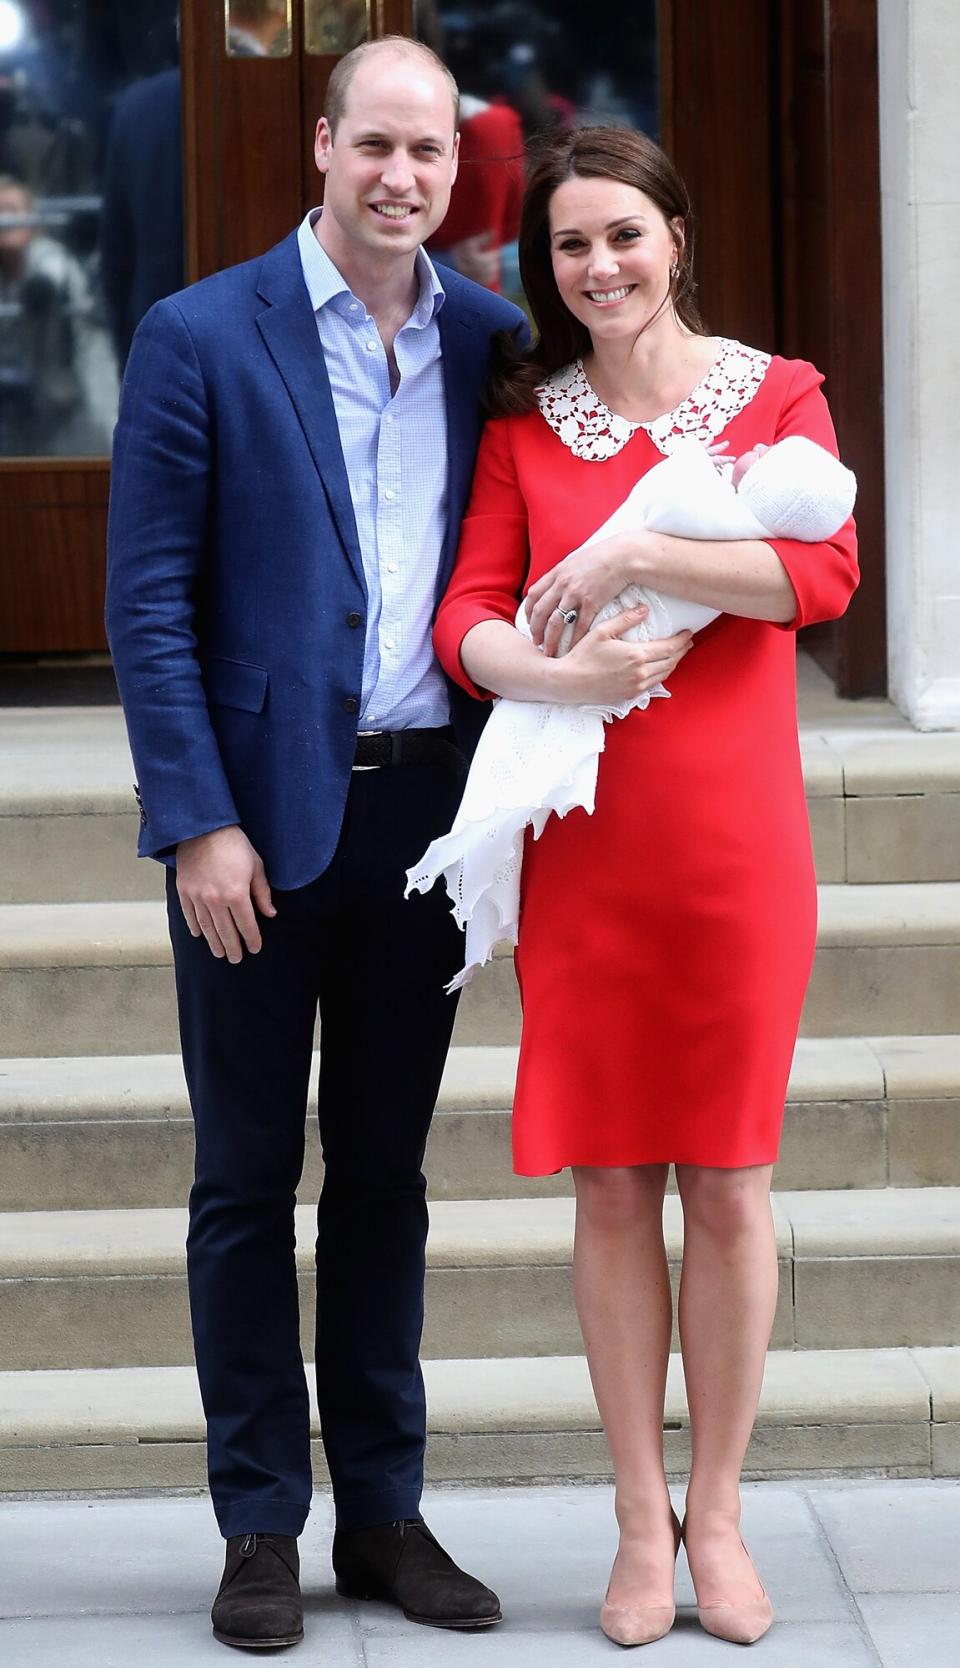 Prince William, Duke of Cambridge and Catherine, Duchess of Cambridge depart the Lindo Wing with their new born son Prince Louis of Cambridge at St Mary's Hospital on April 23, 2018 in London, England